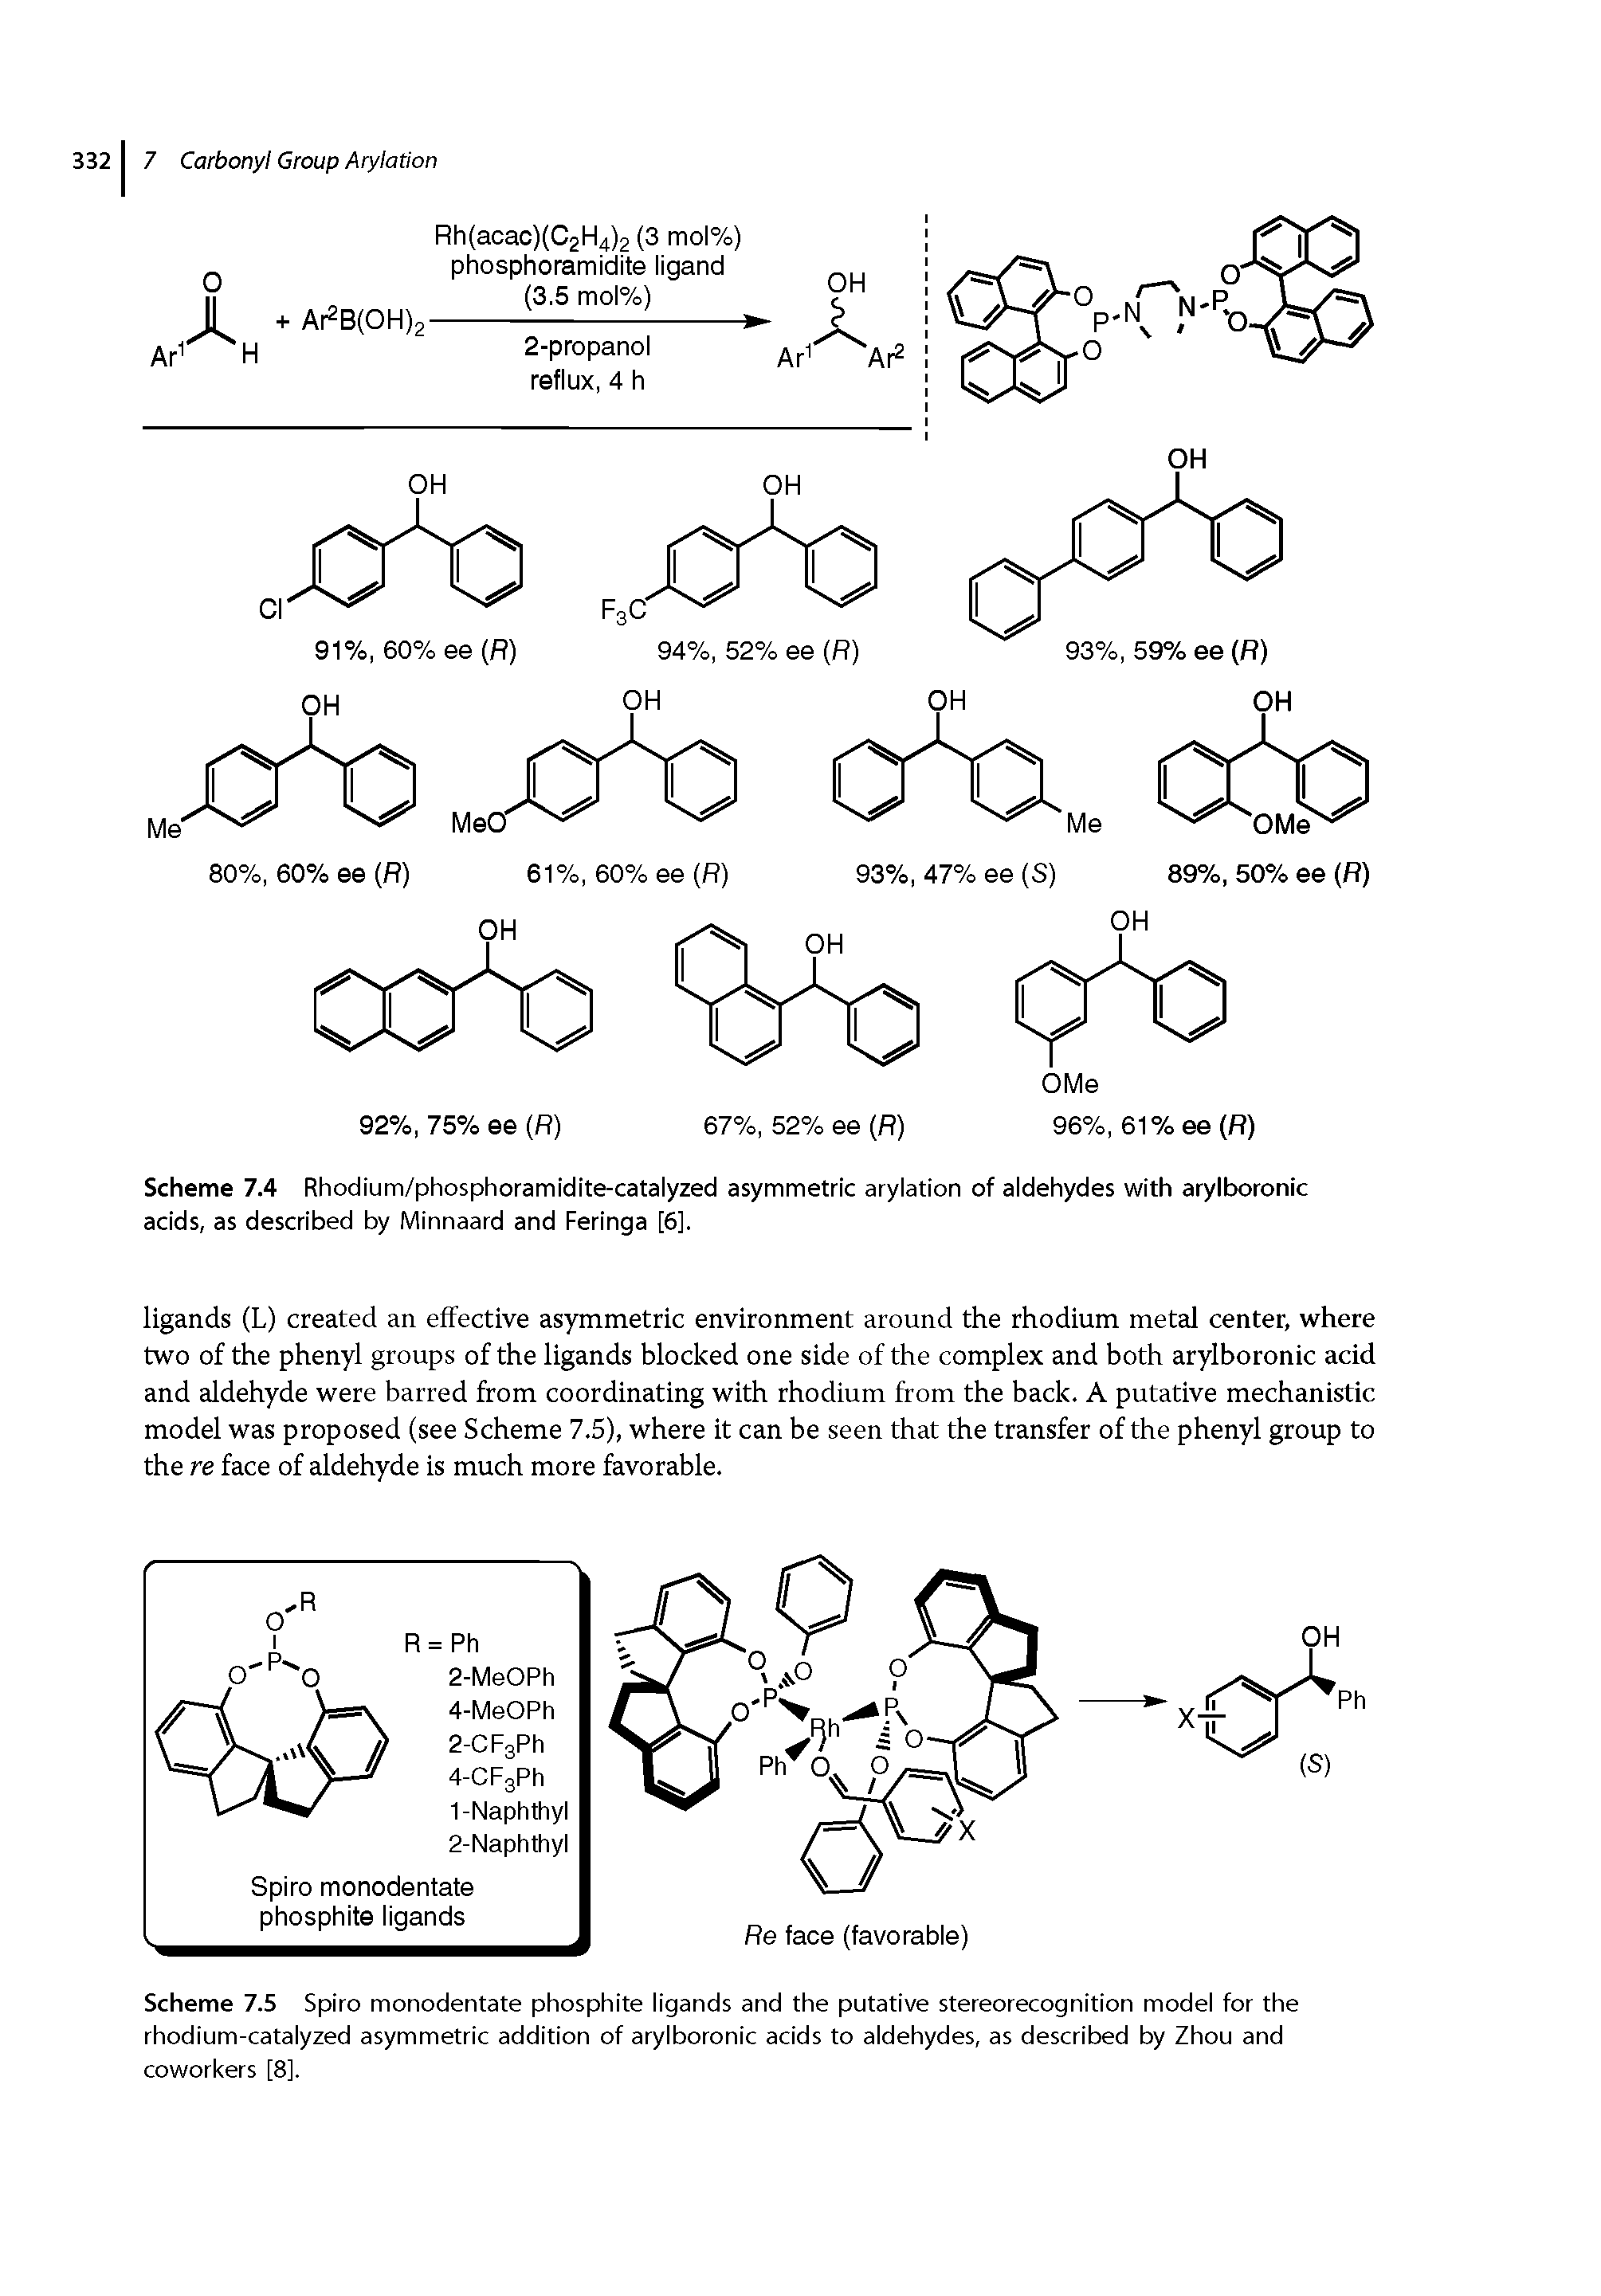 Scheme 7.5 Spiro monodentate phosphite ligands and the putative stereorecognition model for the rhodium-catalyzed asymmetric addition of arylboronic acids to aldehydes, as described by Zhou and coworkers [8].